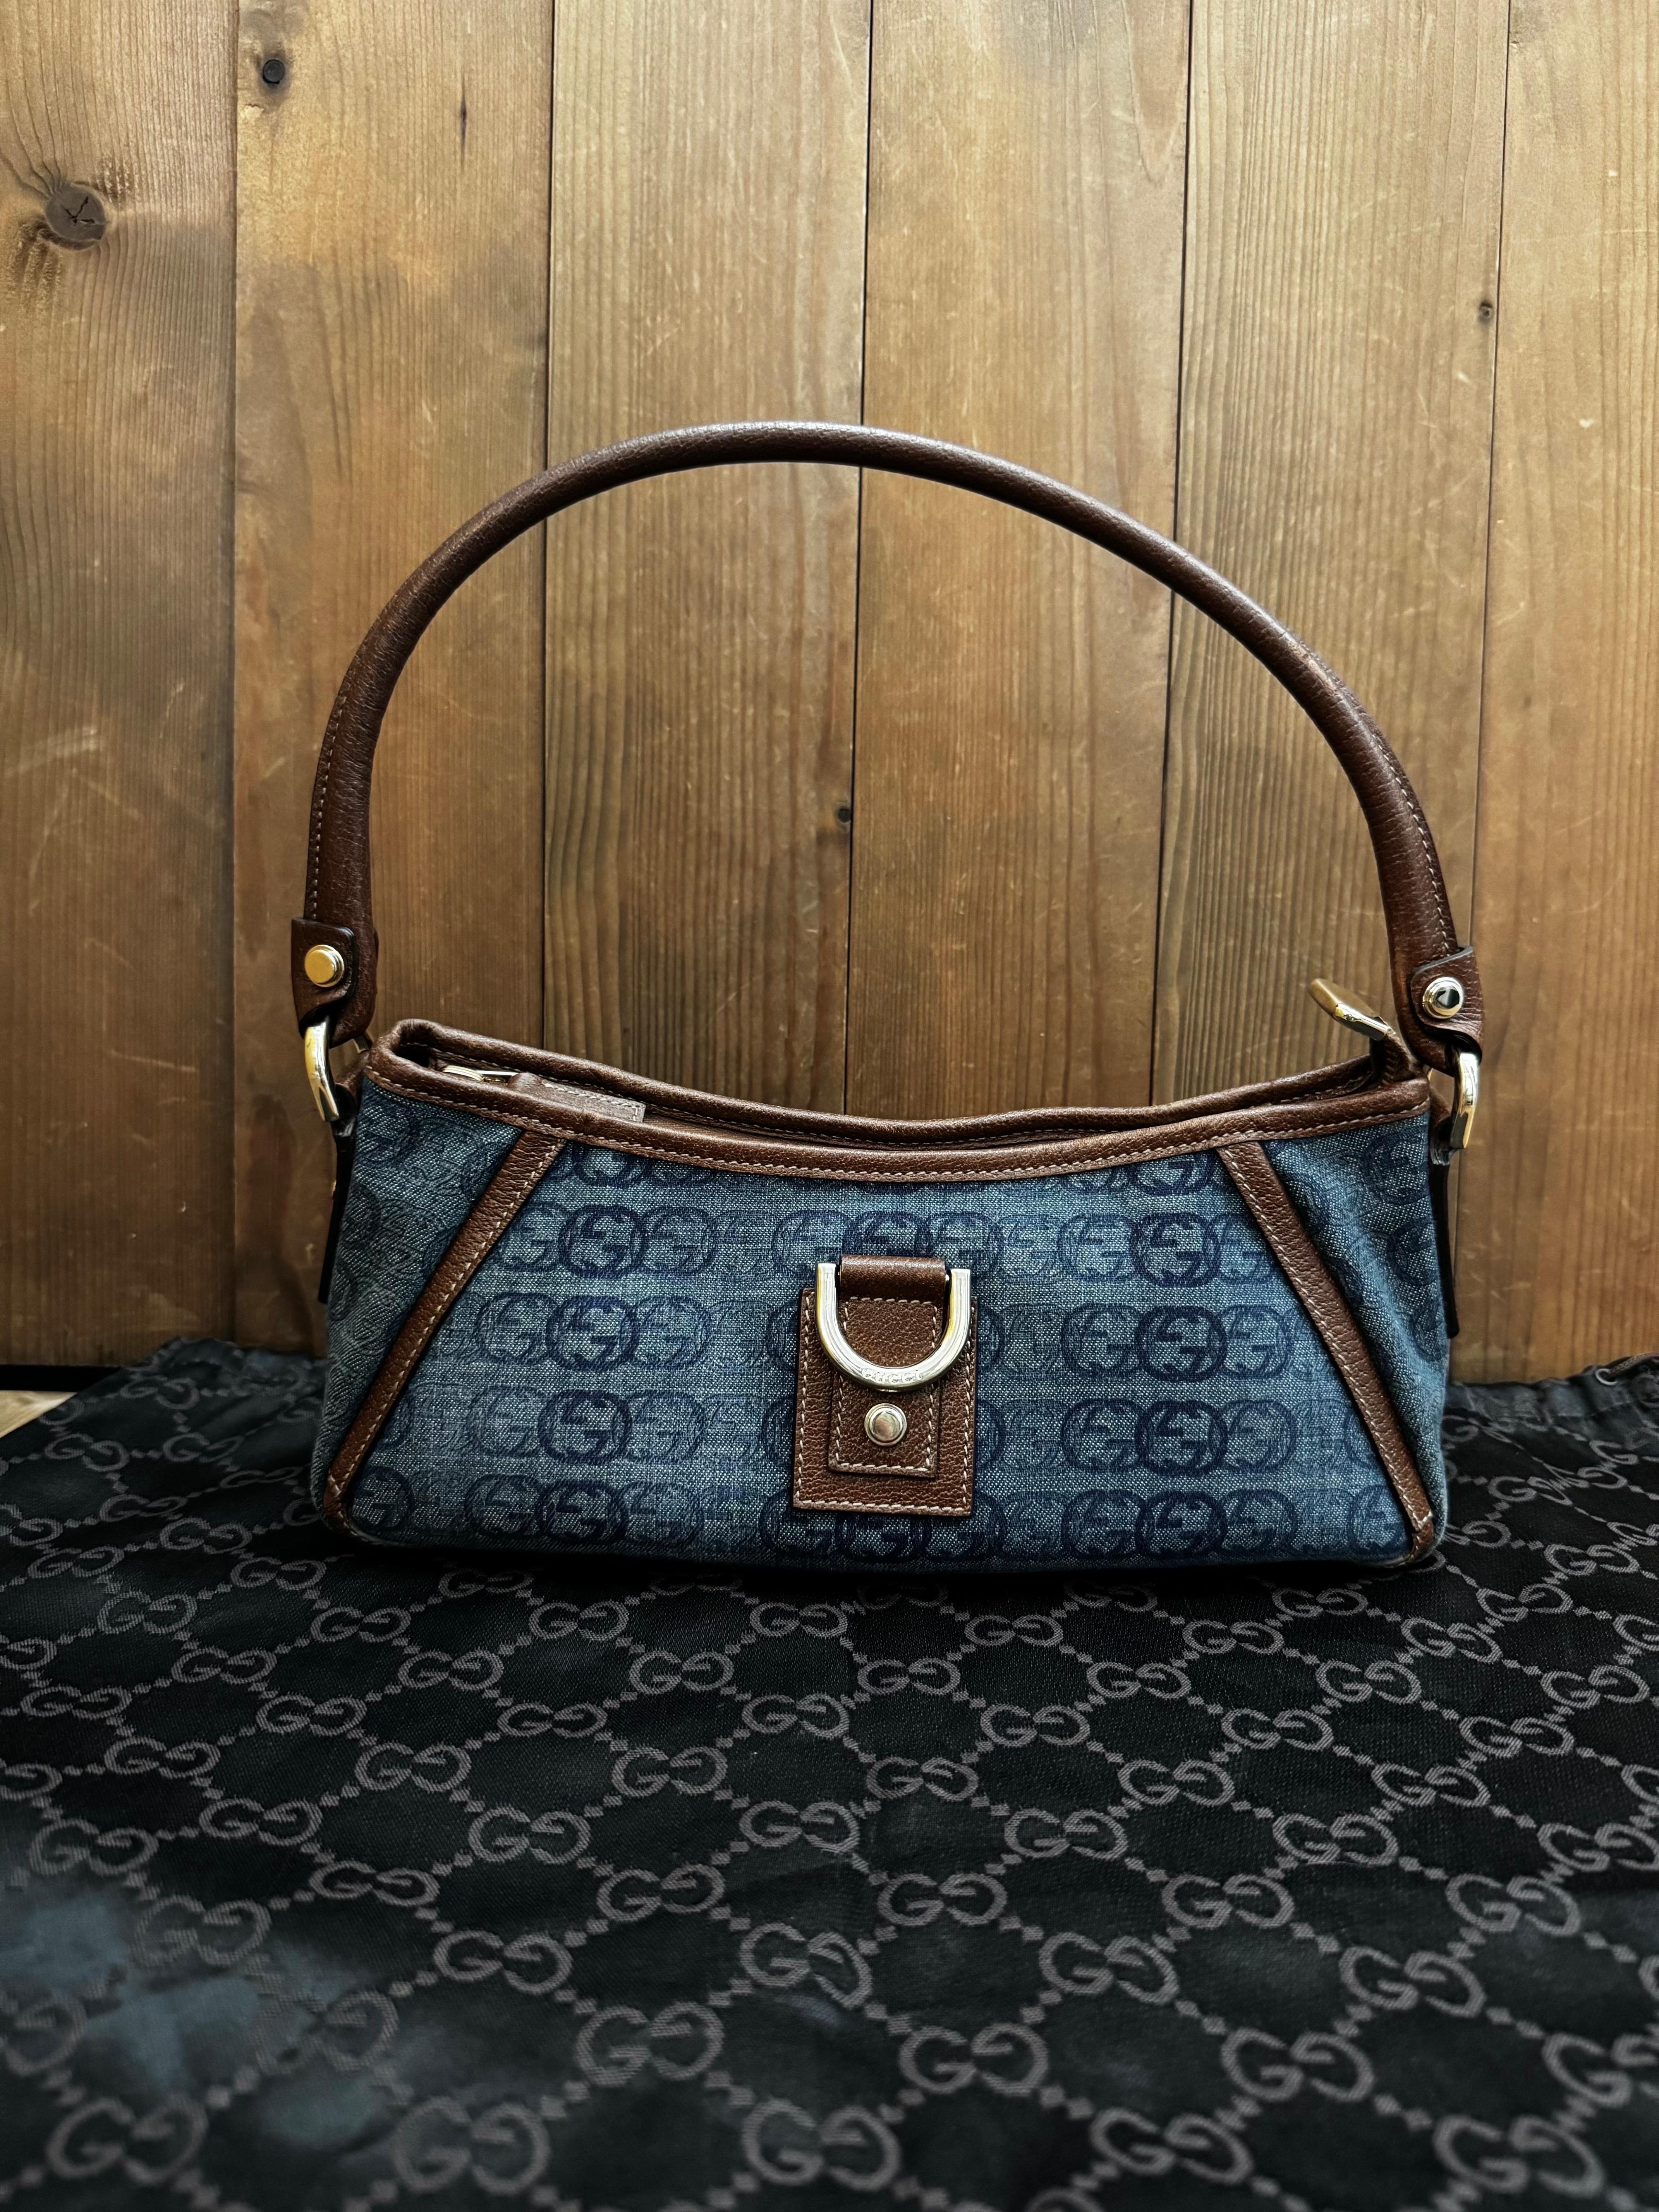 This vintage GUCCI D-ring Abby baguette bag is crafted of Gucci GG monogram stone-washed blue denim and brown leather featuring light gold-toned hardware. Top zipper closure opens to a brown fabric interior with a patch pocket. Made in Italy.